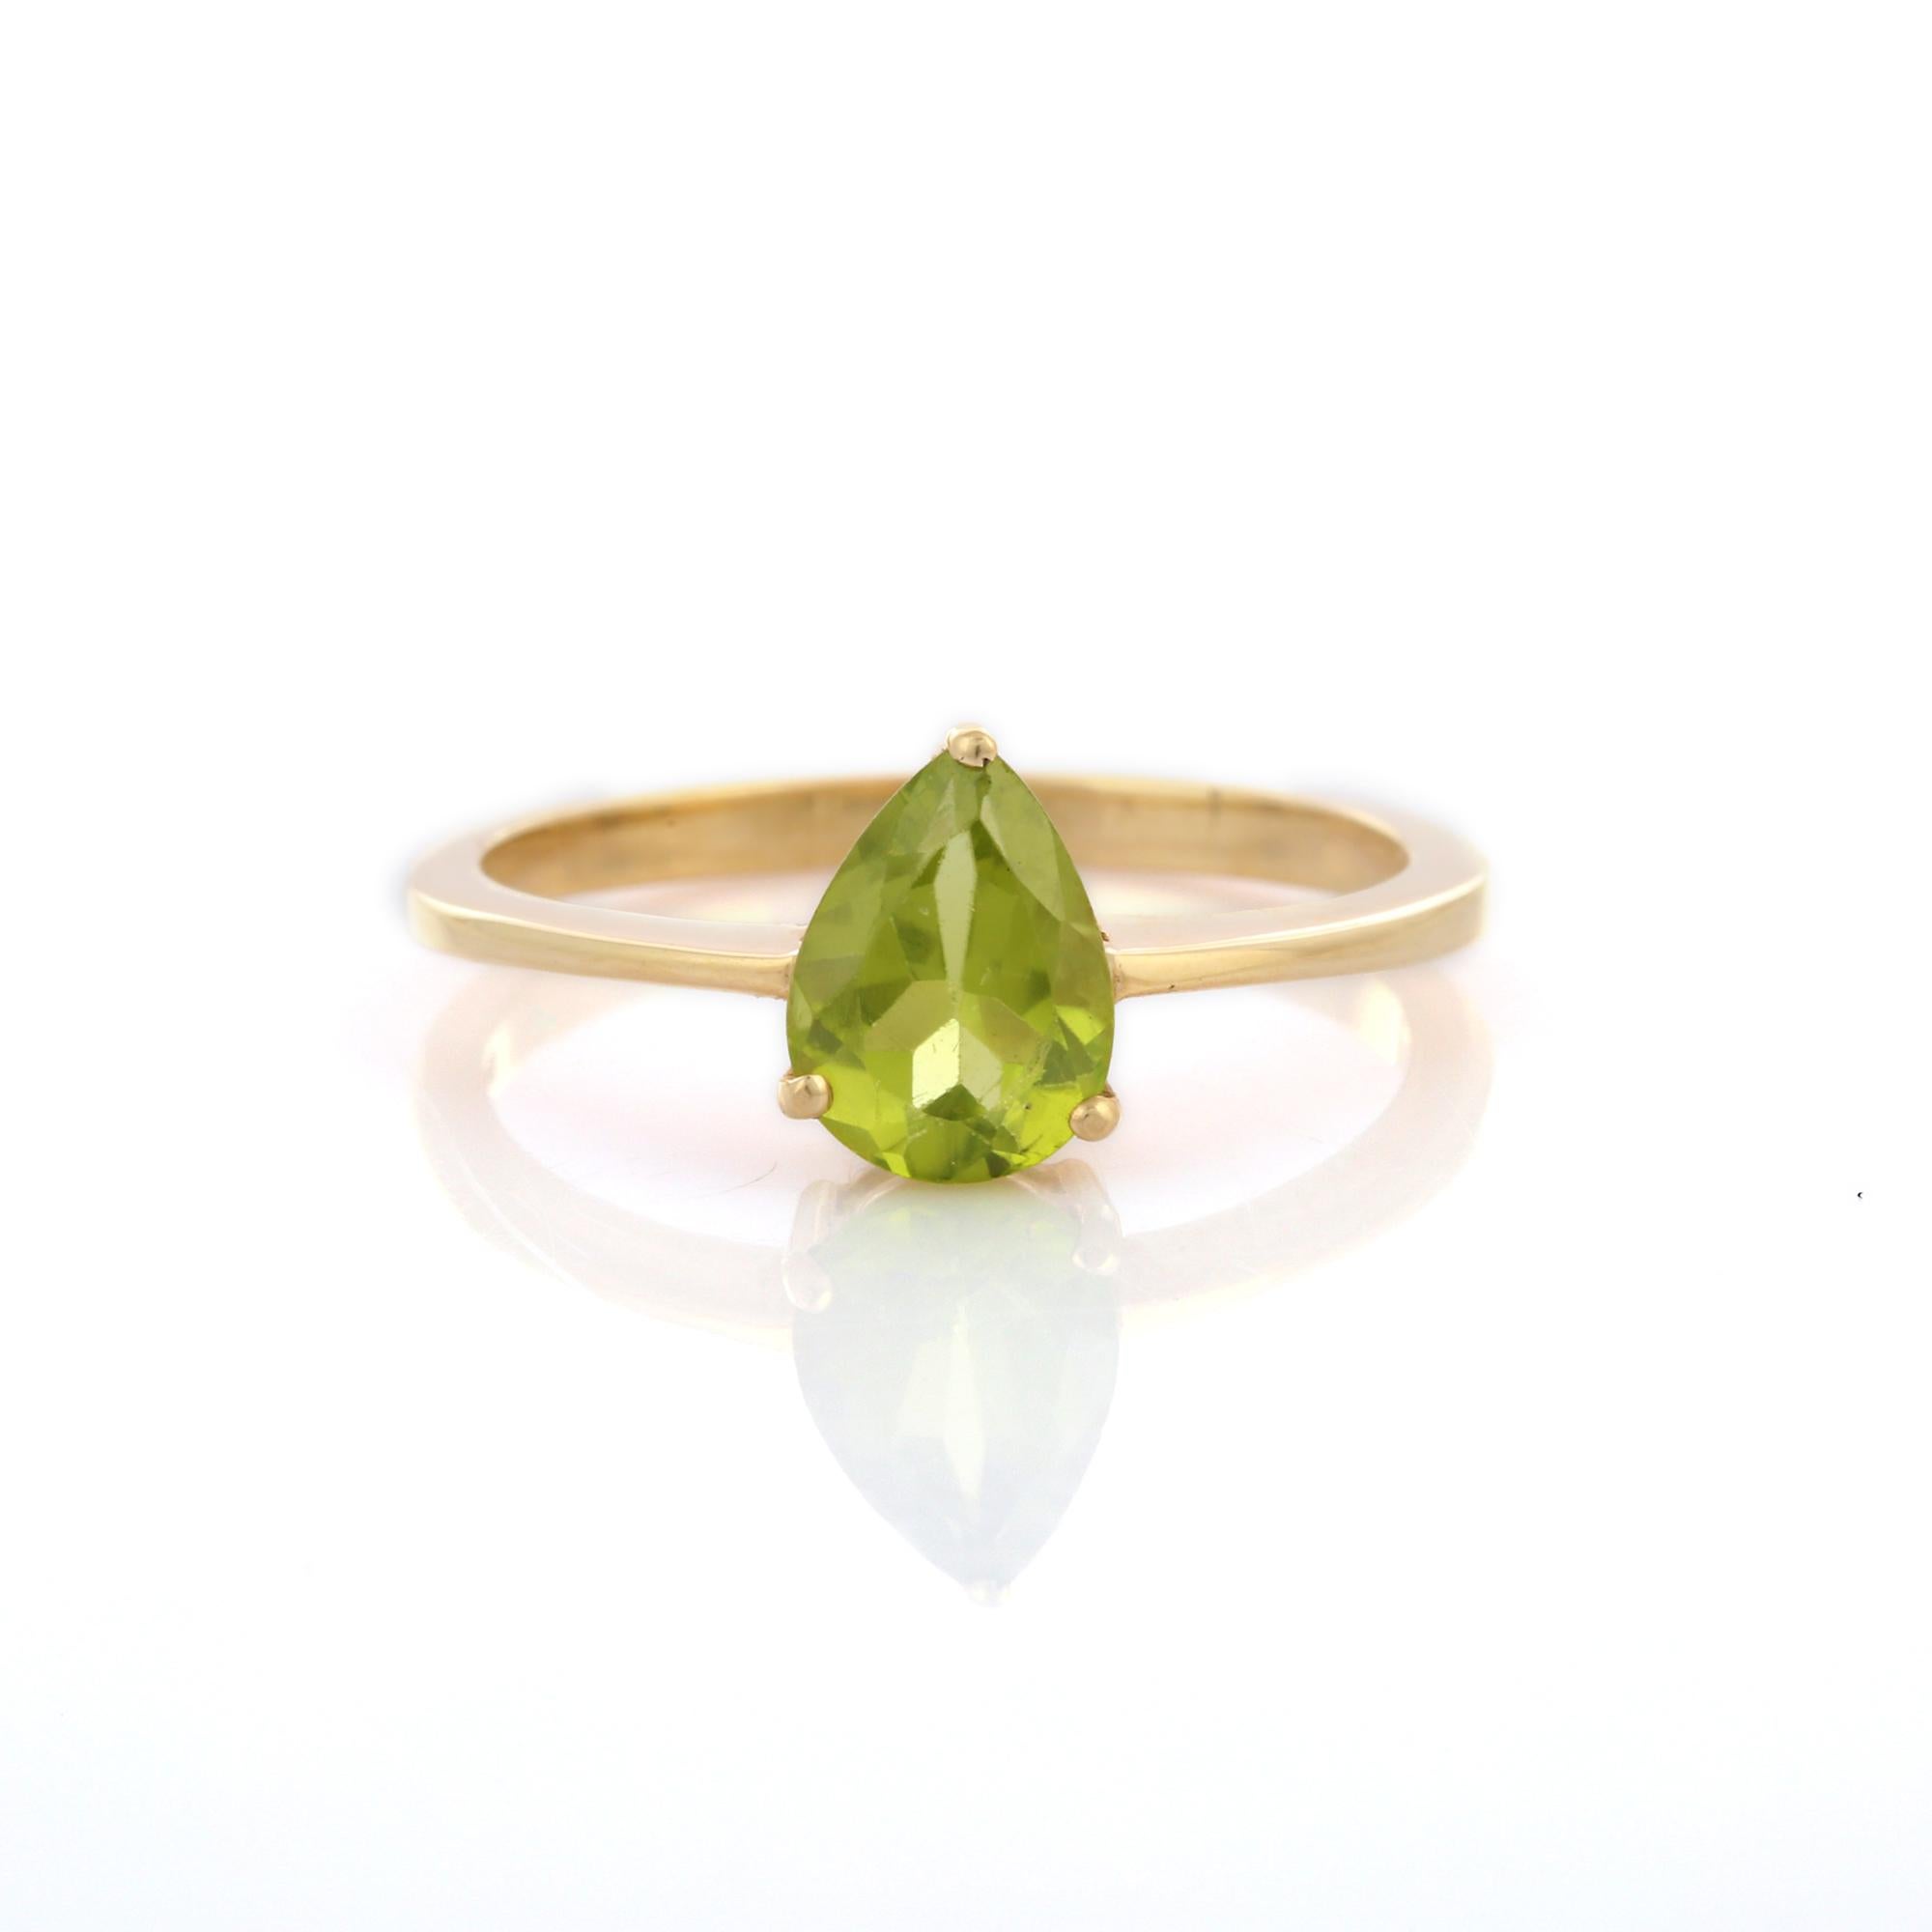 For Sale:  Pear Cut Peridot Solitaire Ring in 14K Yellow Gold 7